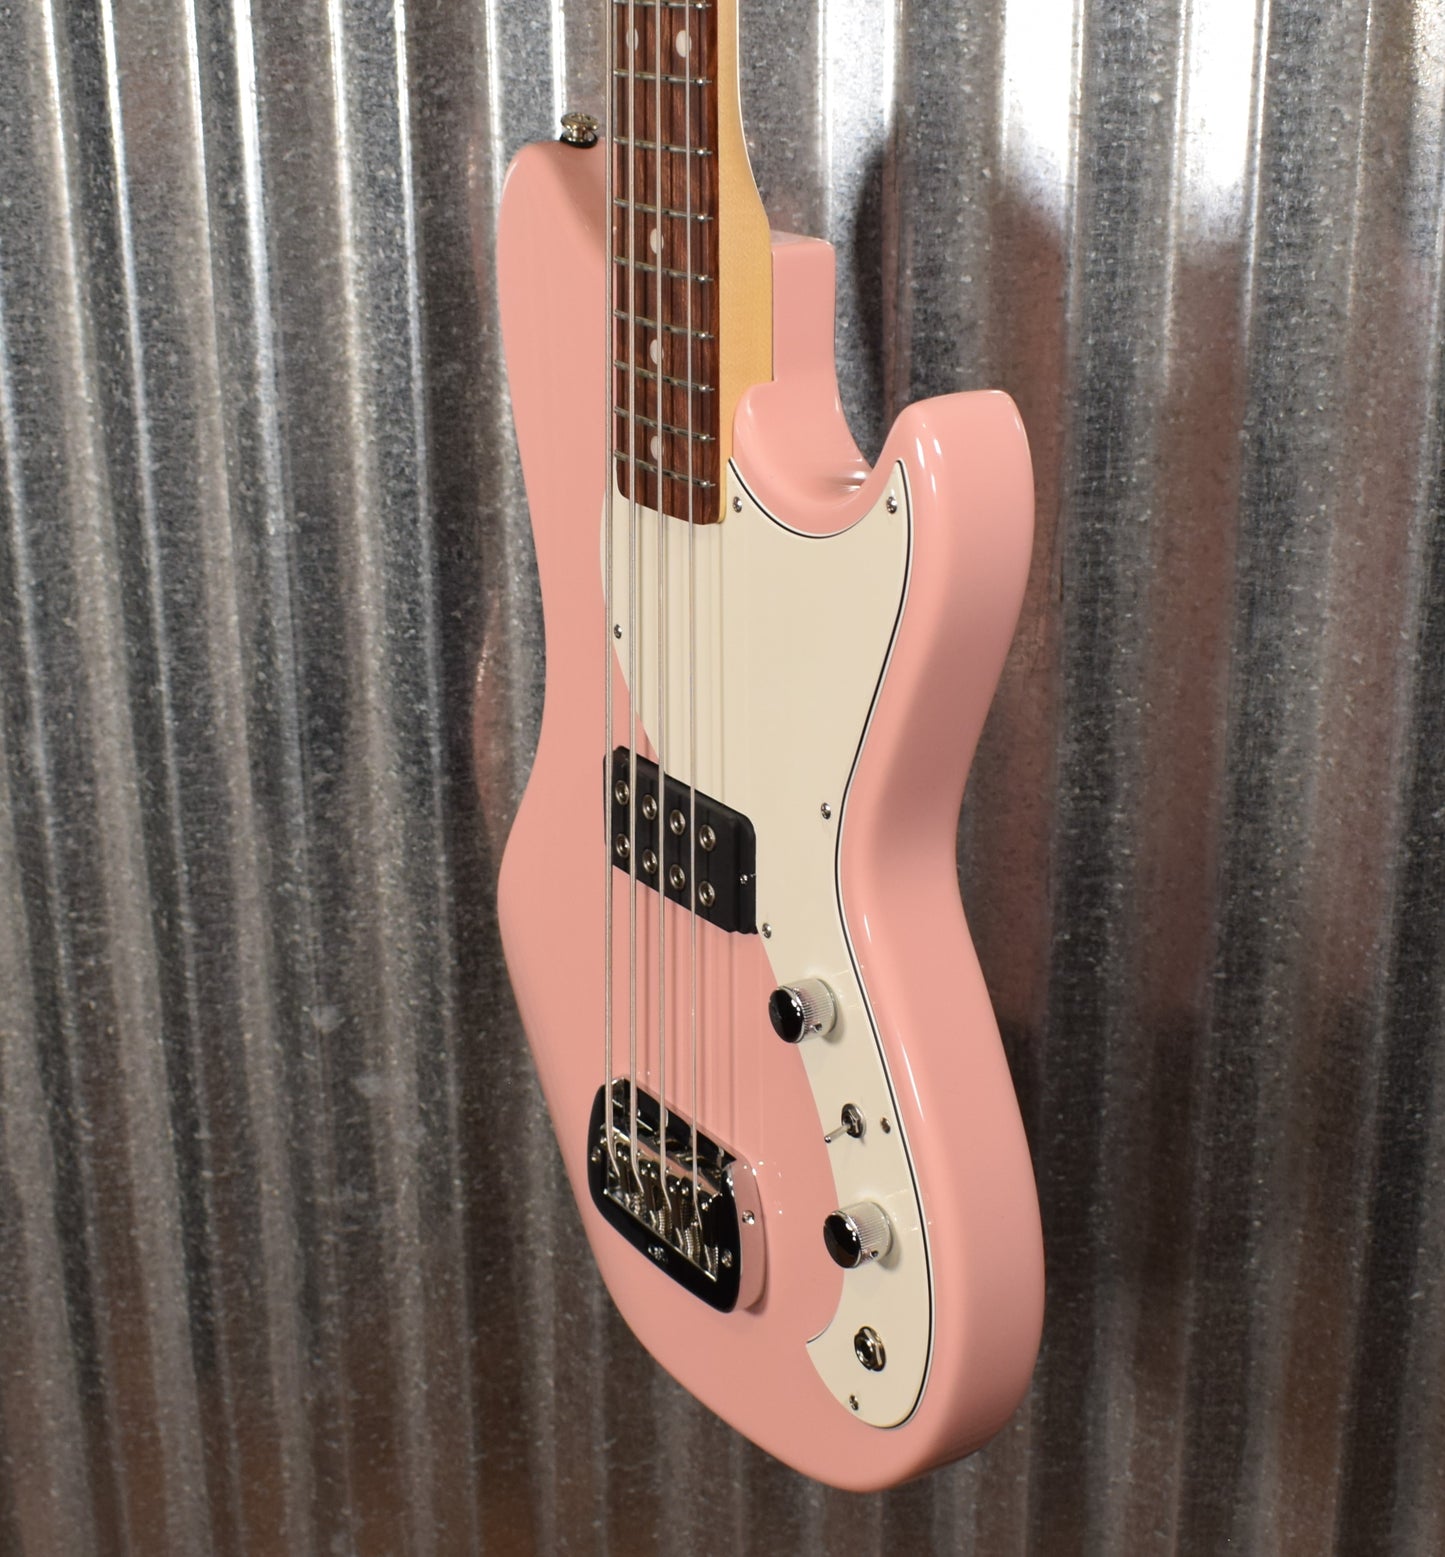 G&L USA Fullerton Deluxe Fallout 4 String Short Scale Bass Shell Pink & Bag #5181